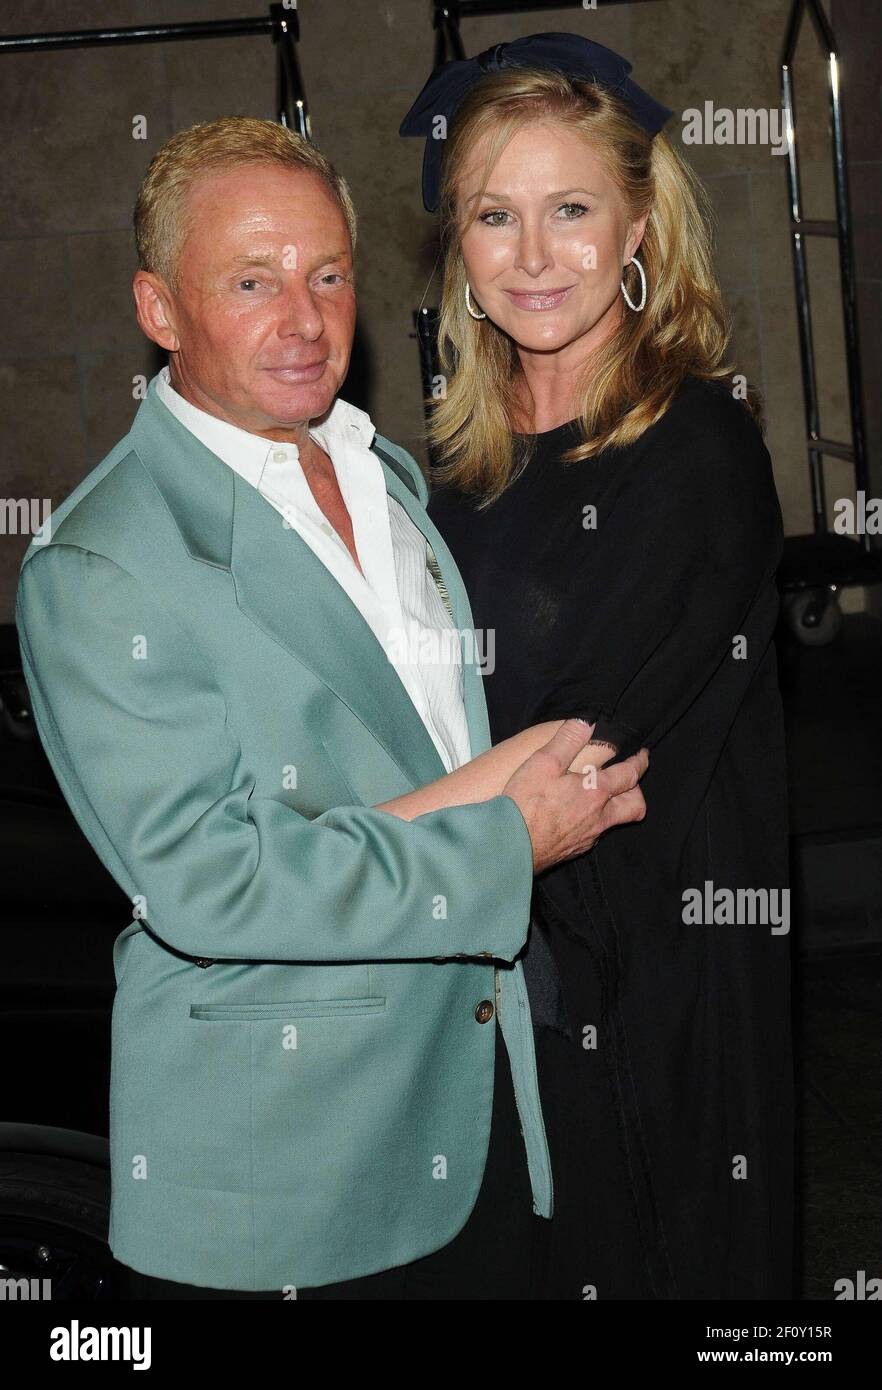 Kathy Hilton and Elliot Mintz. 2 October 2008 - Beverly Hills, California.  InStyle Hosts Party For Tommy Hilfiger's Bravo TV Special Ironic Iconic  America held at The Thompson Hotel. Photo Credit: Giulio